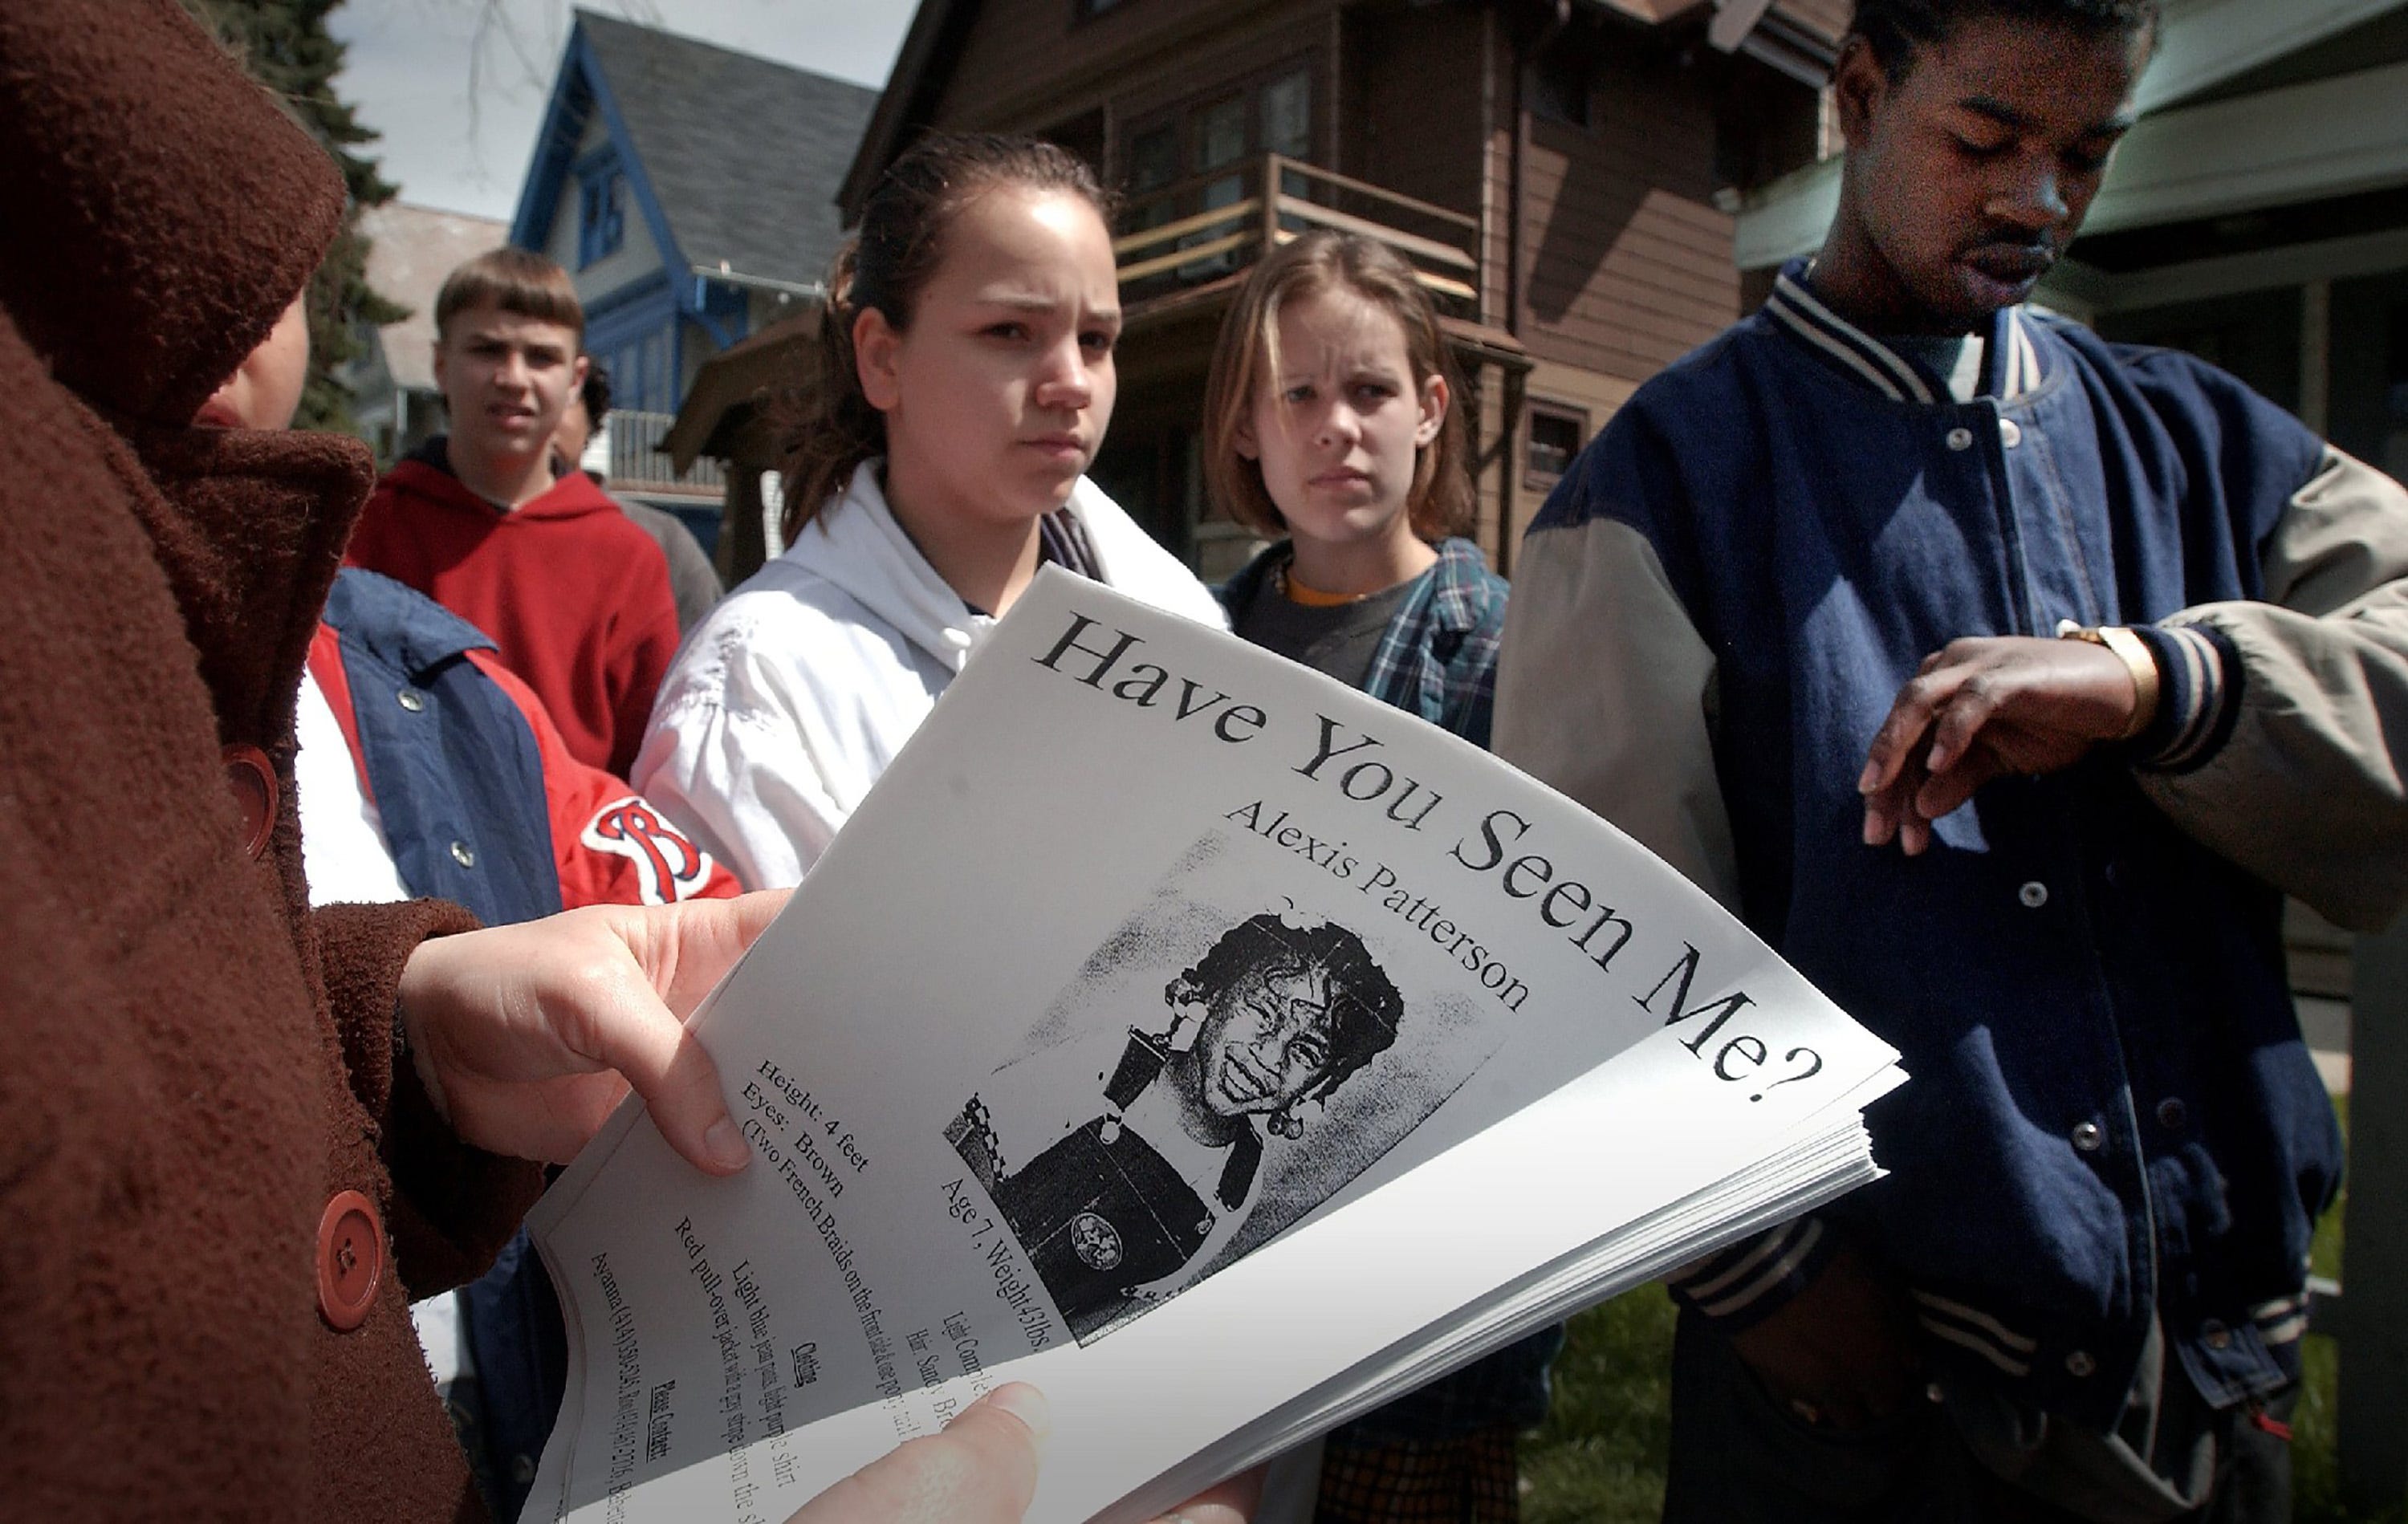 GIRL, NEW, TOM LYNN, 5 of 6.-Student volunteers from El Puente High School gather on N. 49th St. infront of Alexis Patterson's home ready to distribute posters and help in the search for the missing girl Tuesday May 7, 2002.